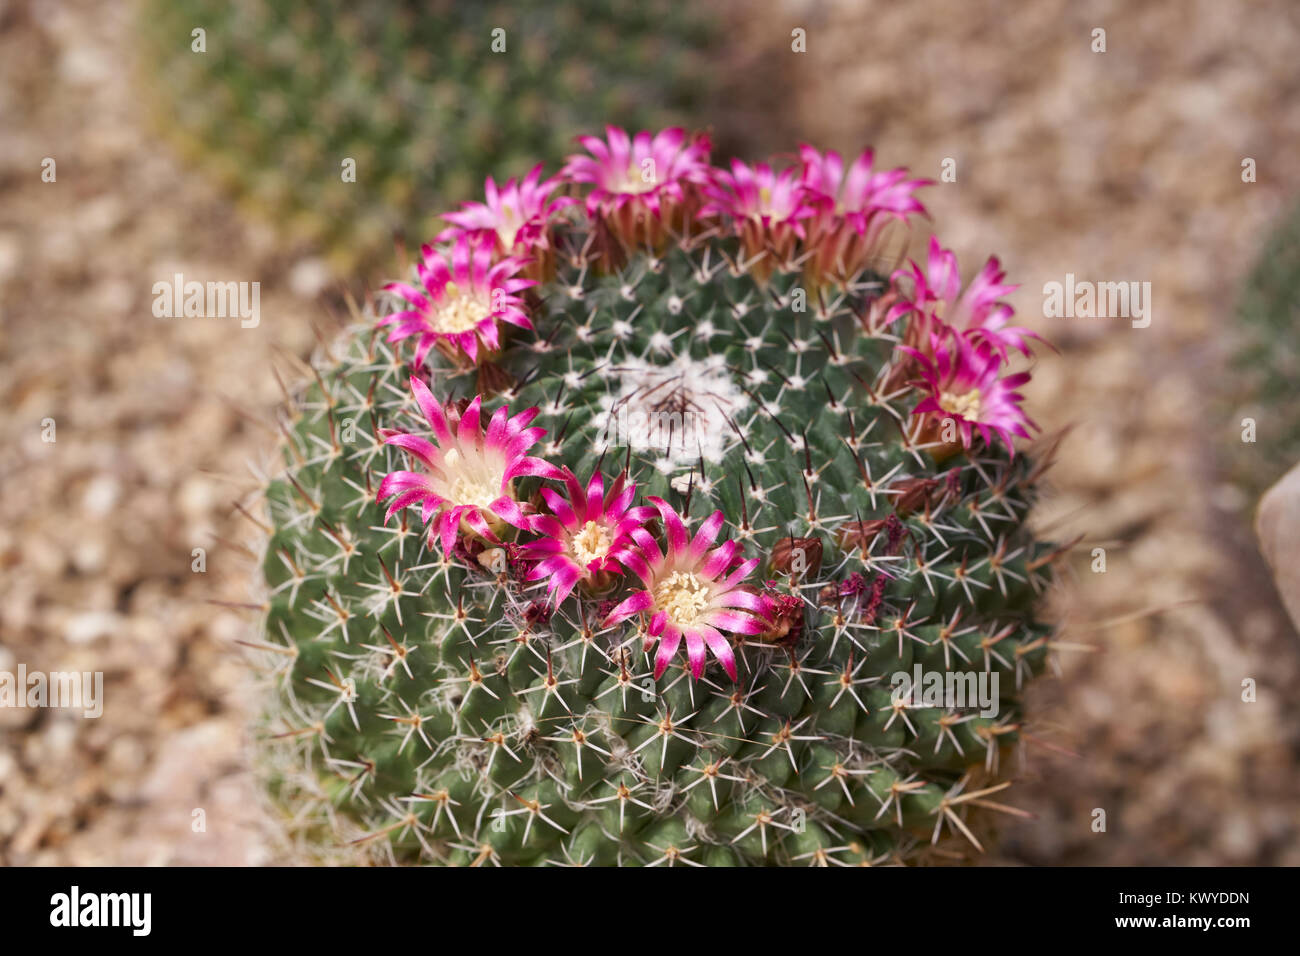 Mammillaria mystax is a species of cactus in the family Cactaceae. It is native to the Mexican states of Hidalgo, Oaxaca and central Puebla. Stock Photo